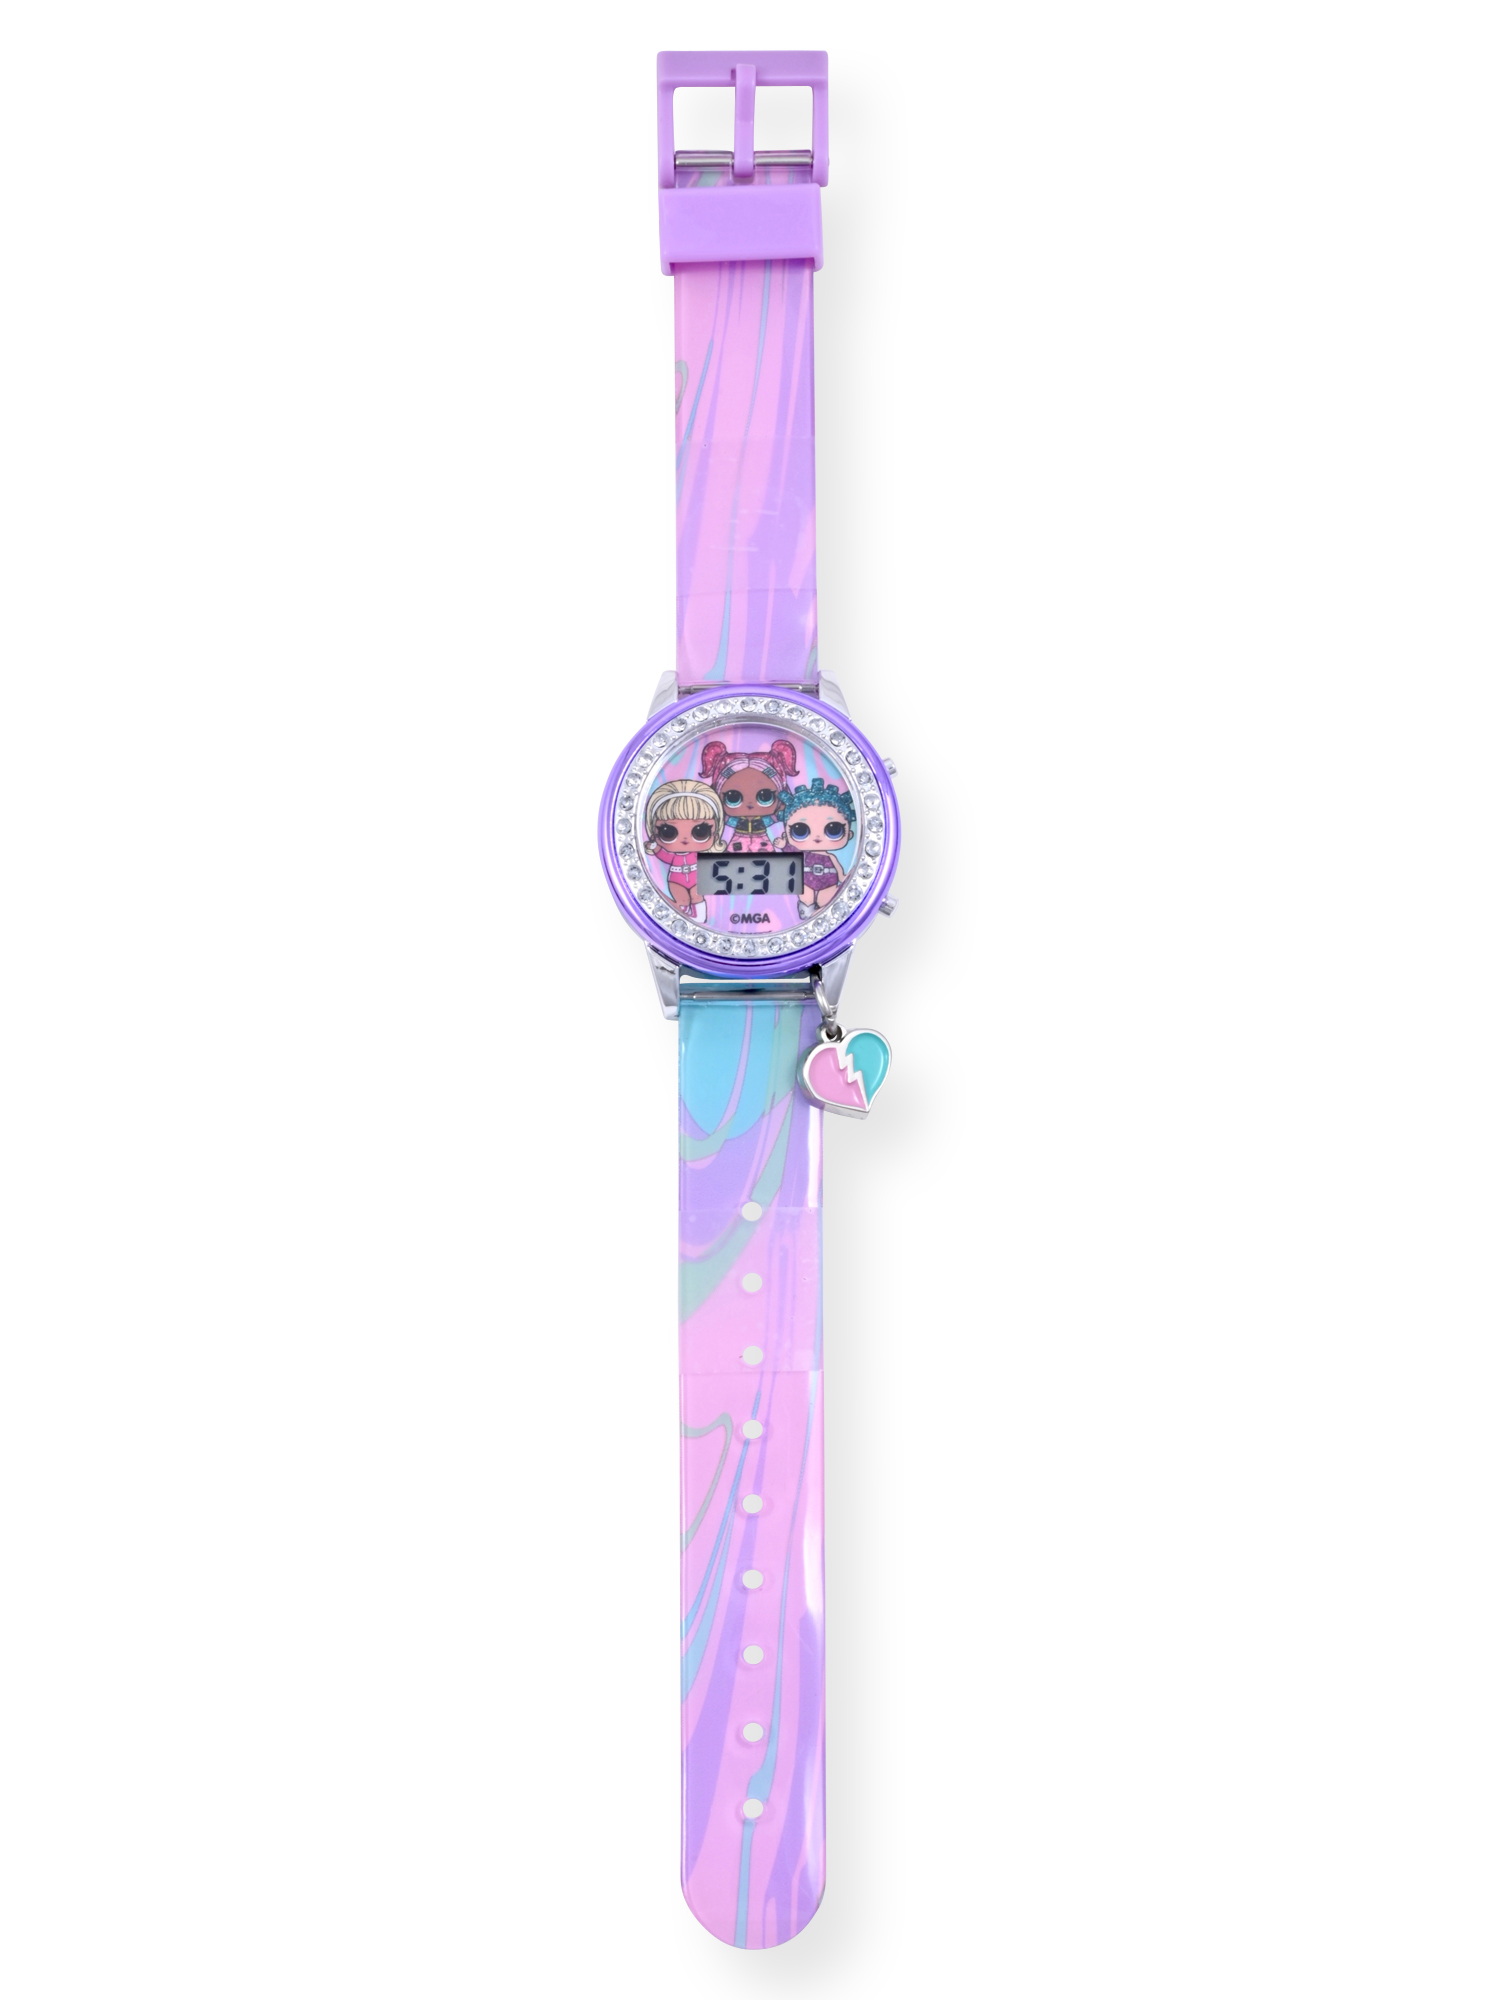 MGM Entertainment LOL Surprise! Girl's Flashing LCD Ombre Silicone Watch & Matching Bracelets 3 Piece Set - image 3 of 7